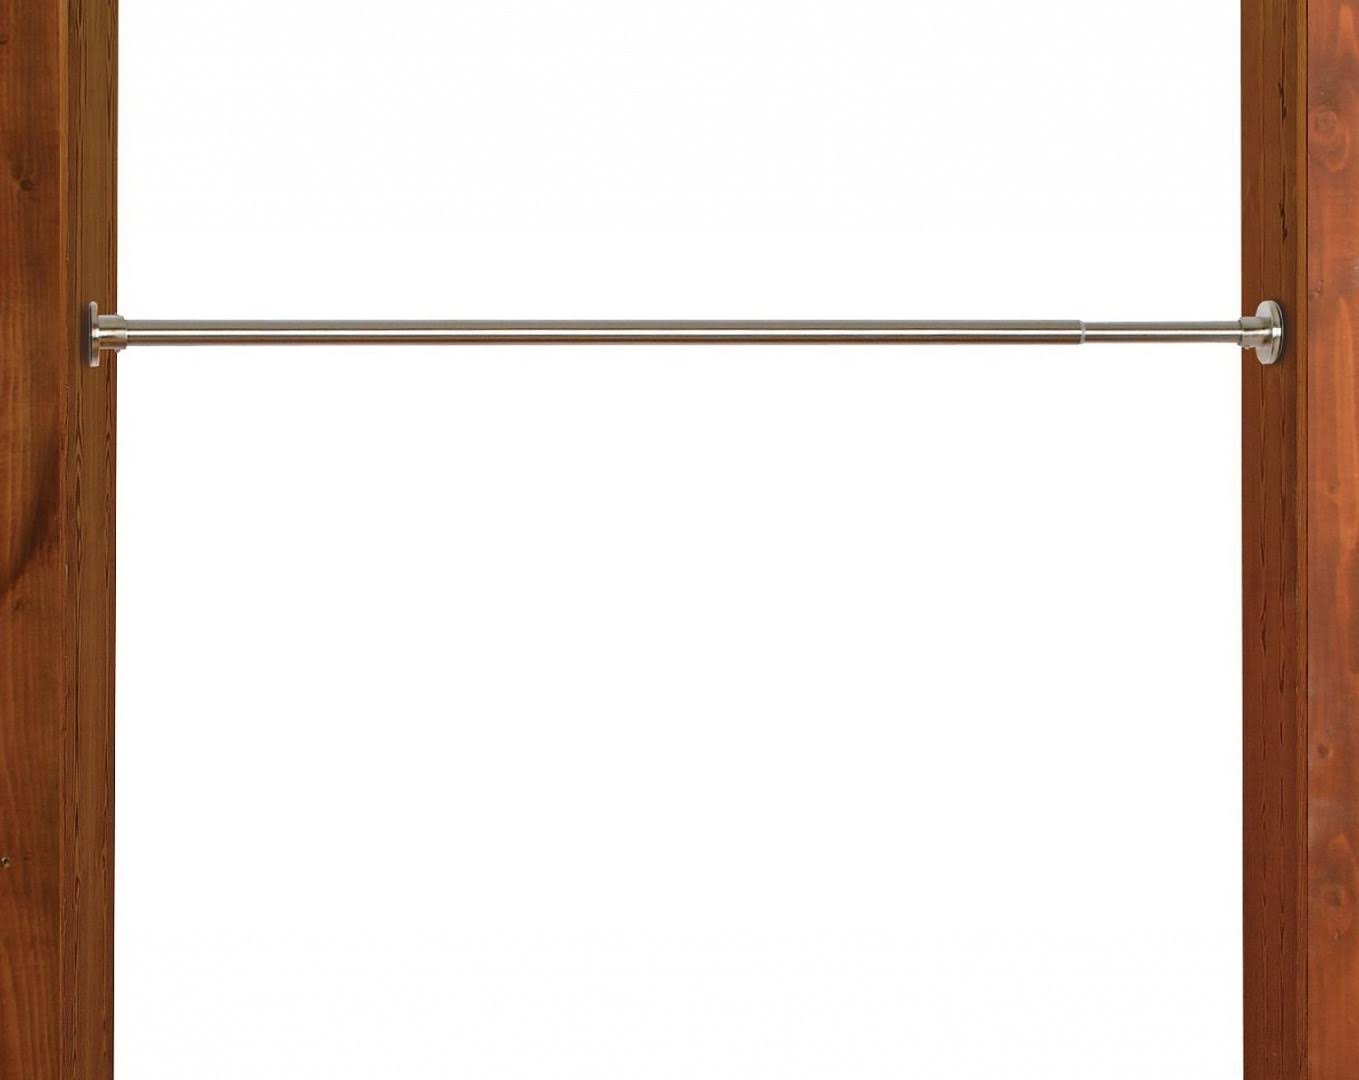 Versailles Home Fashions Duo Indoor/Outdoor Stainless Steel Tension Rod, Brushed Nickel, 66 x 120